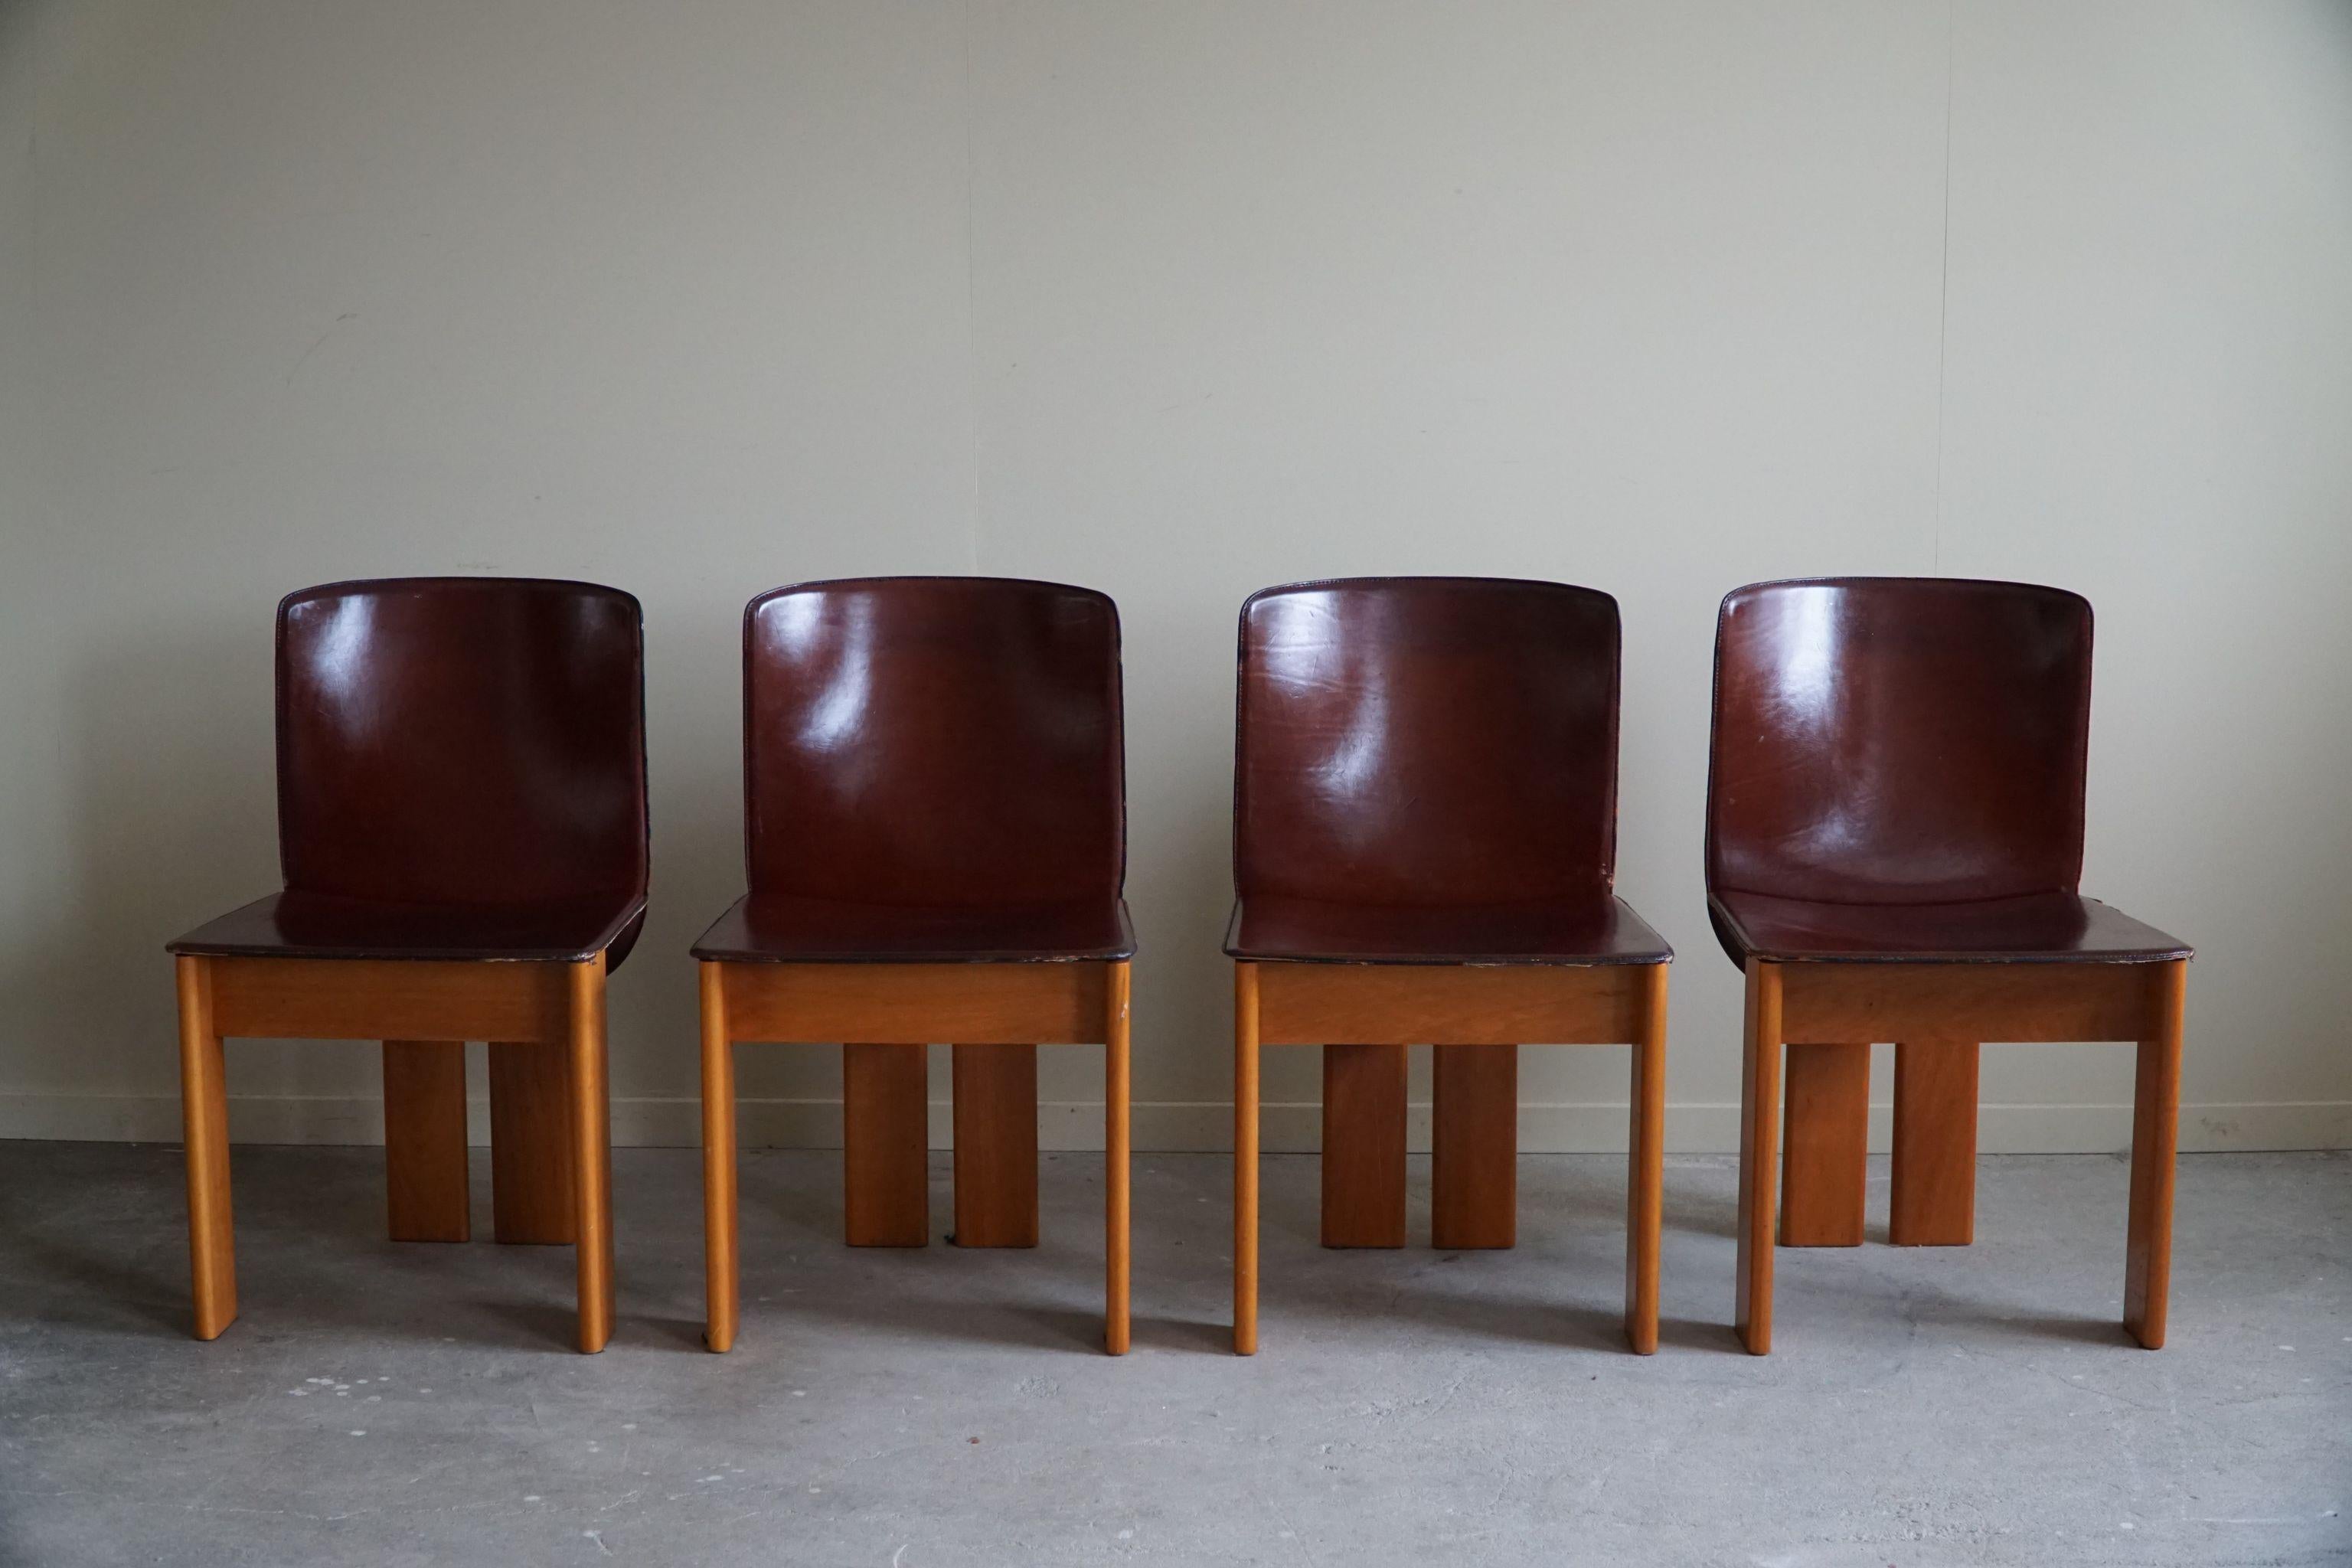 Italian Mid Century Modern, Set of 4 Leather Chairs, Tobia Scarpa Style, 1960s For Sale 2